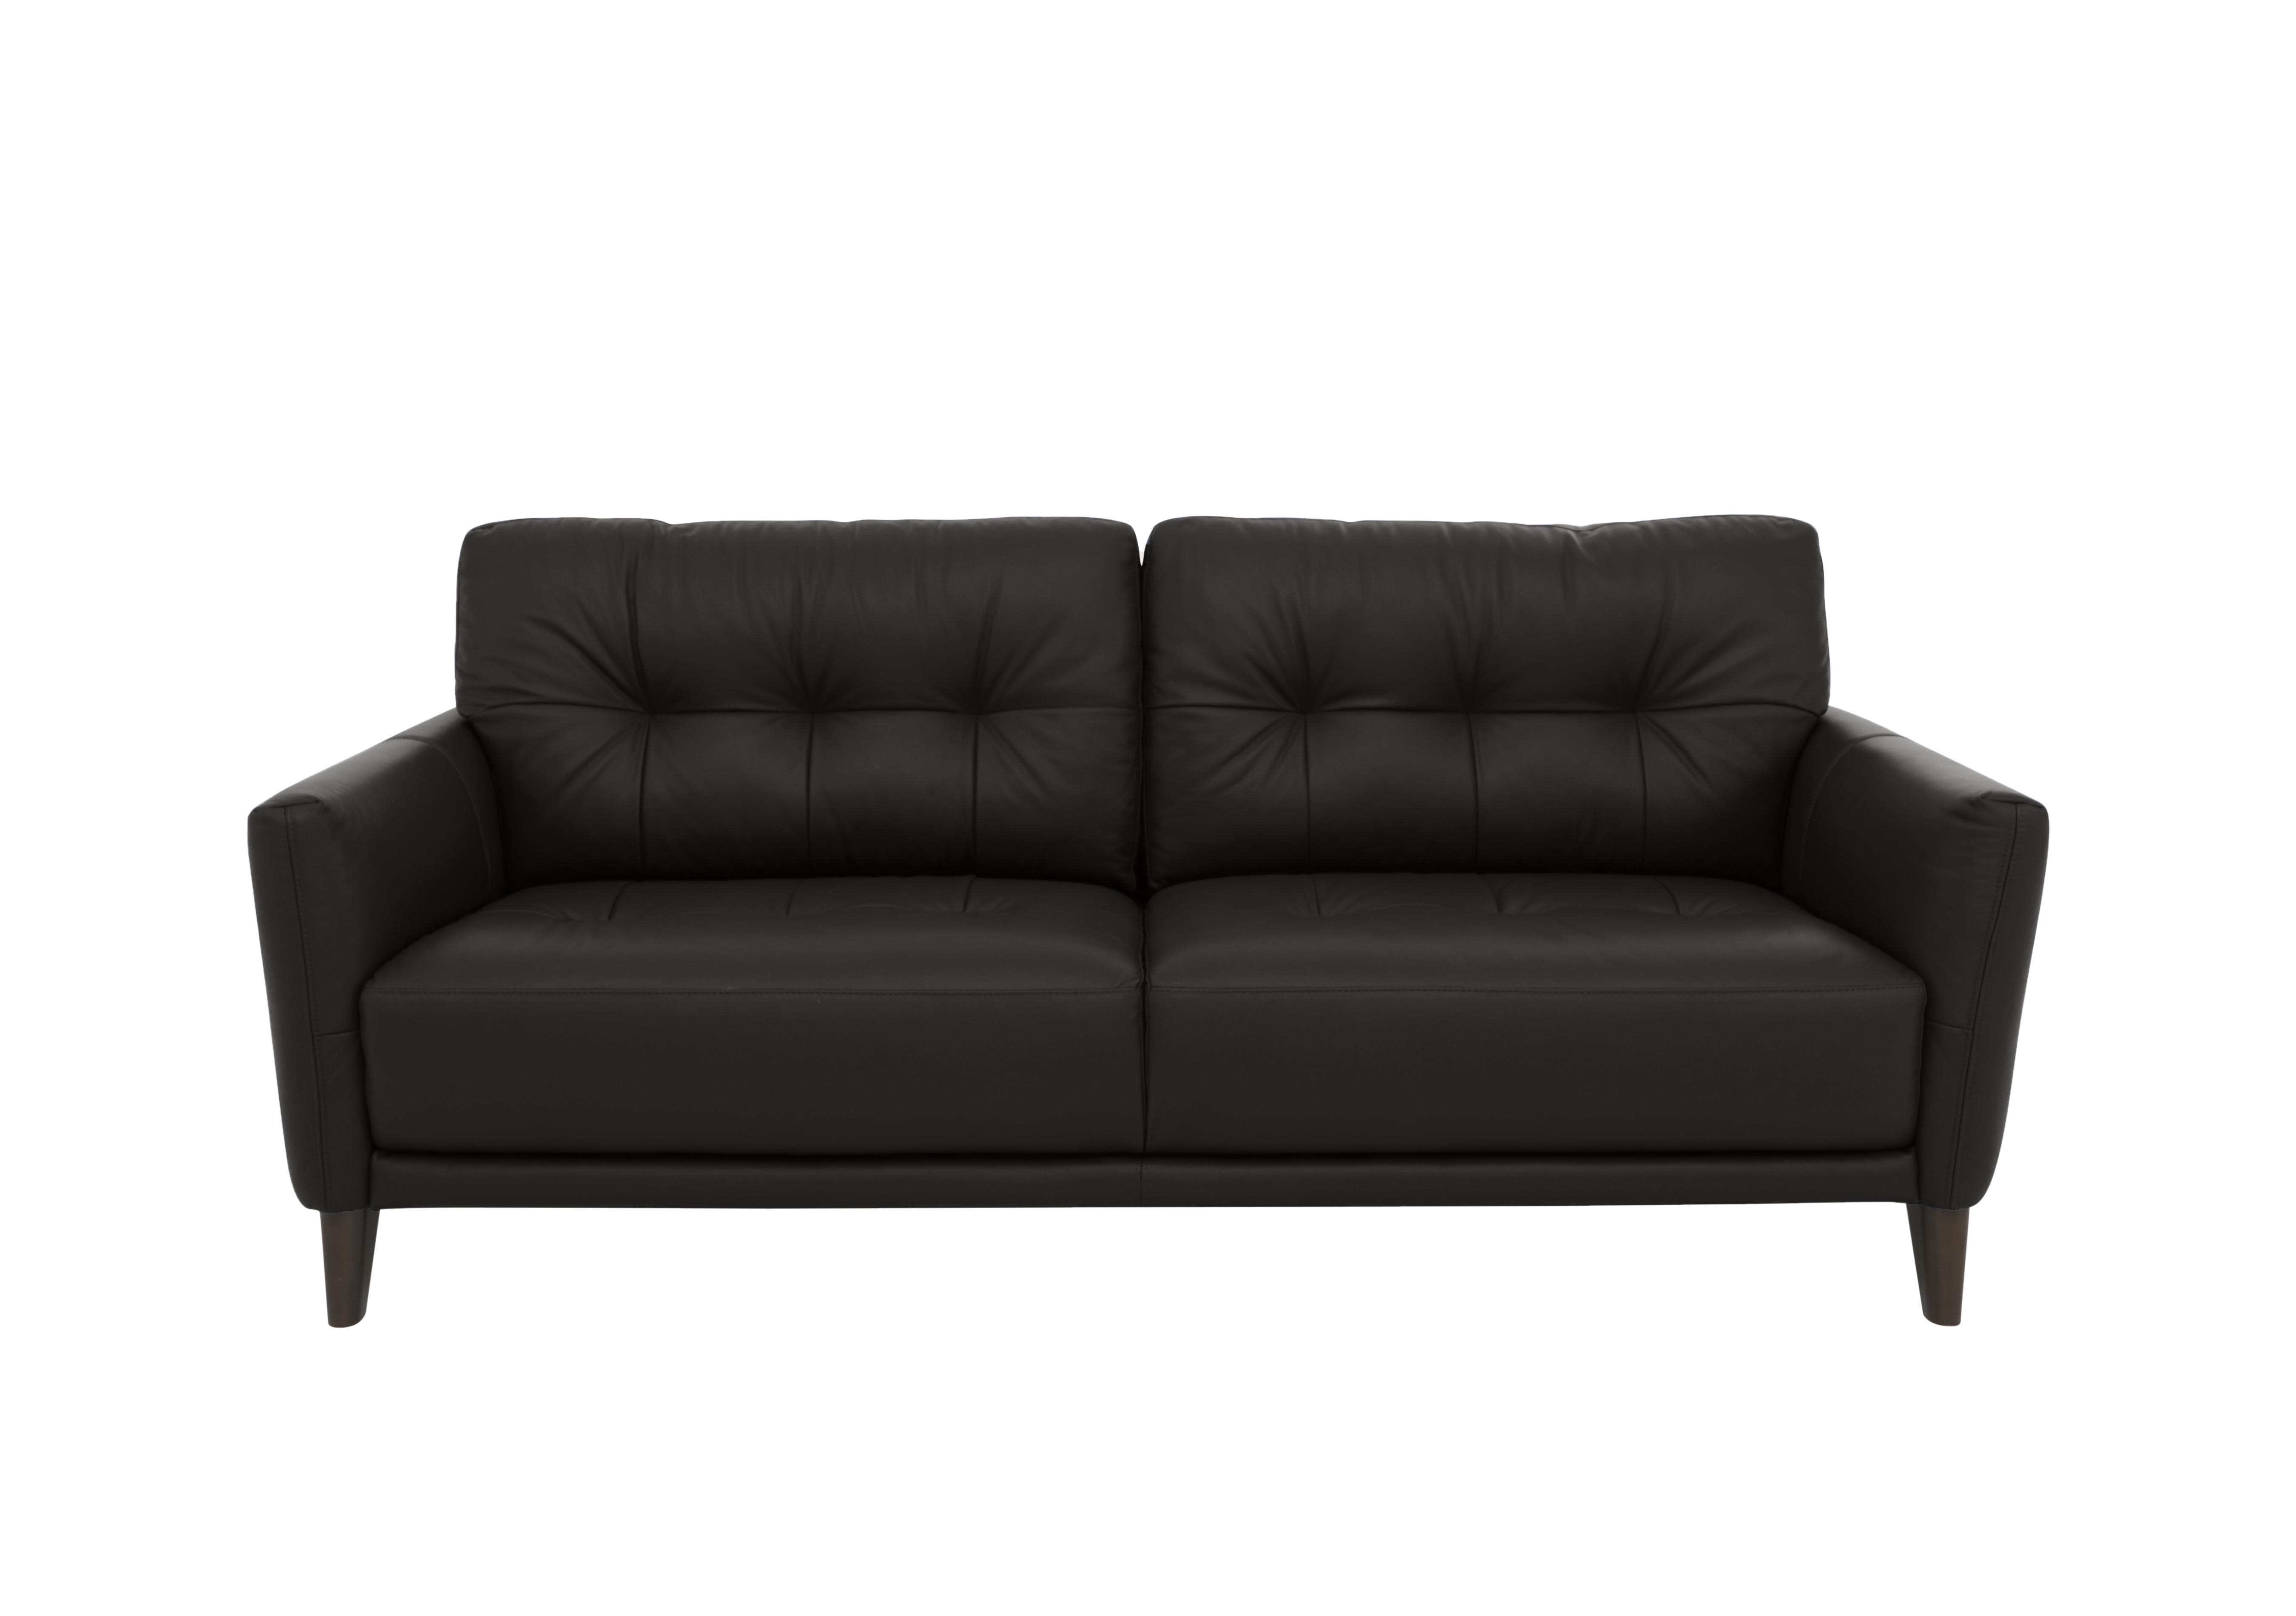 Uno Leather 3 Seater Sofa in Bv-3500 Classic Black on Furniture Village